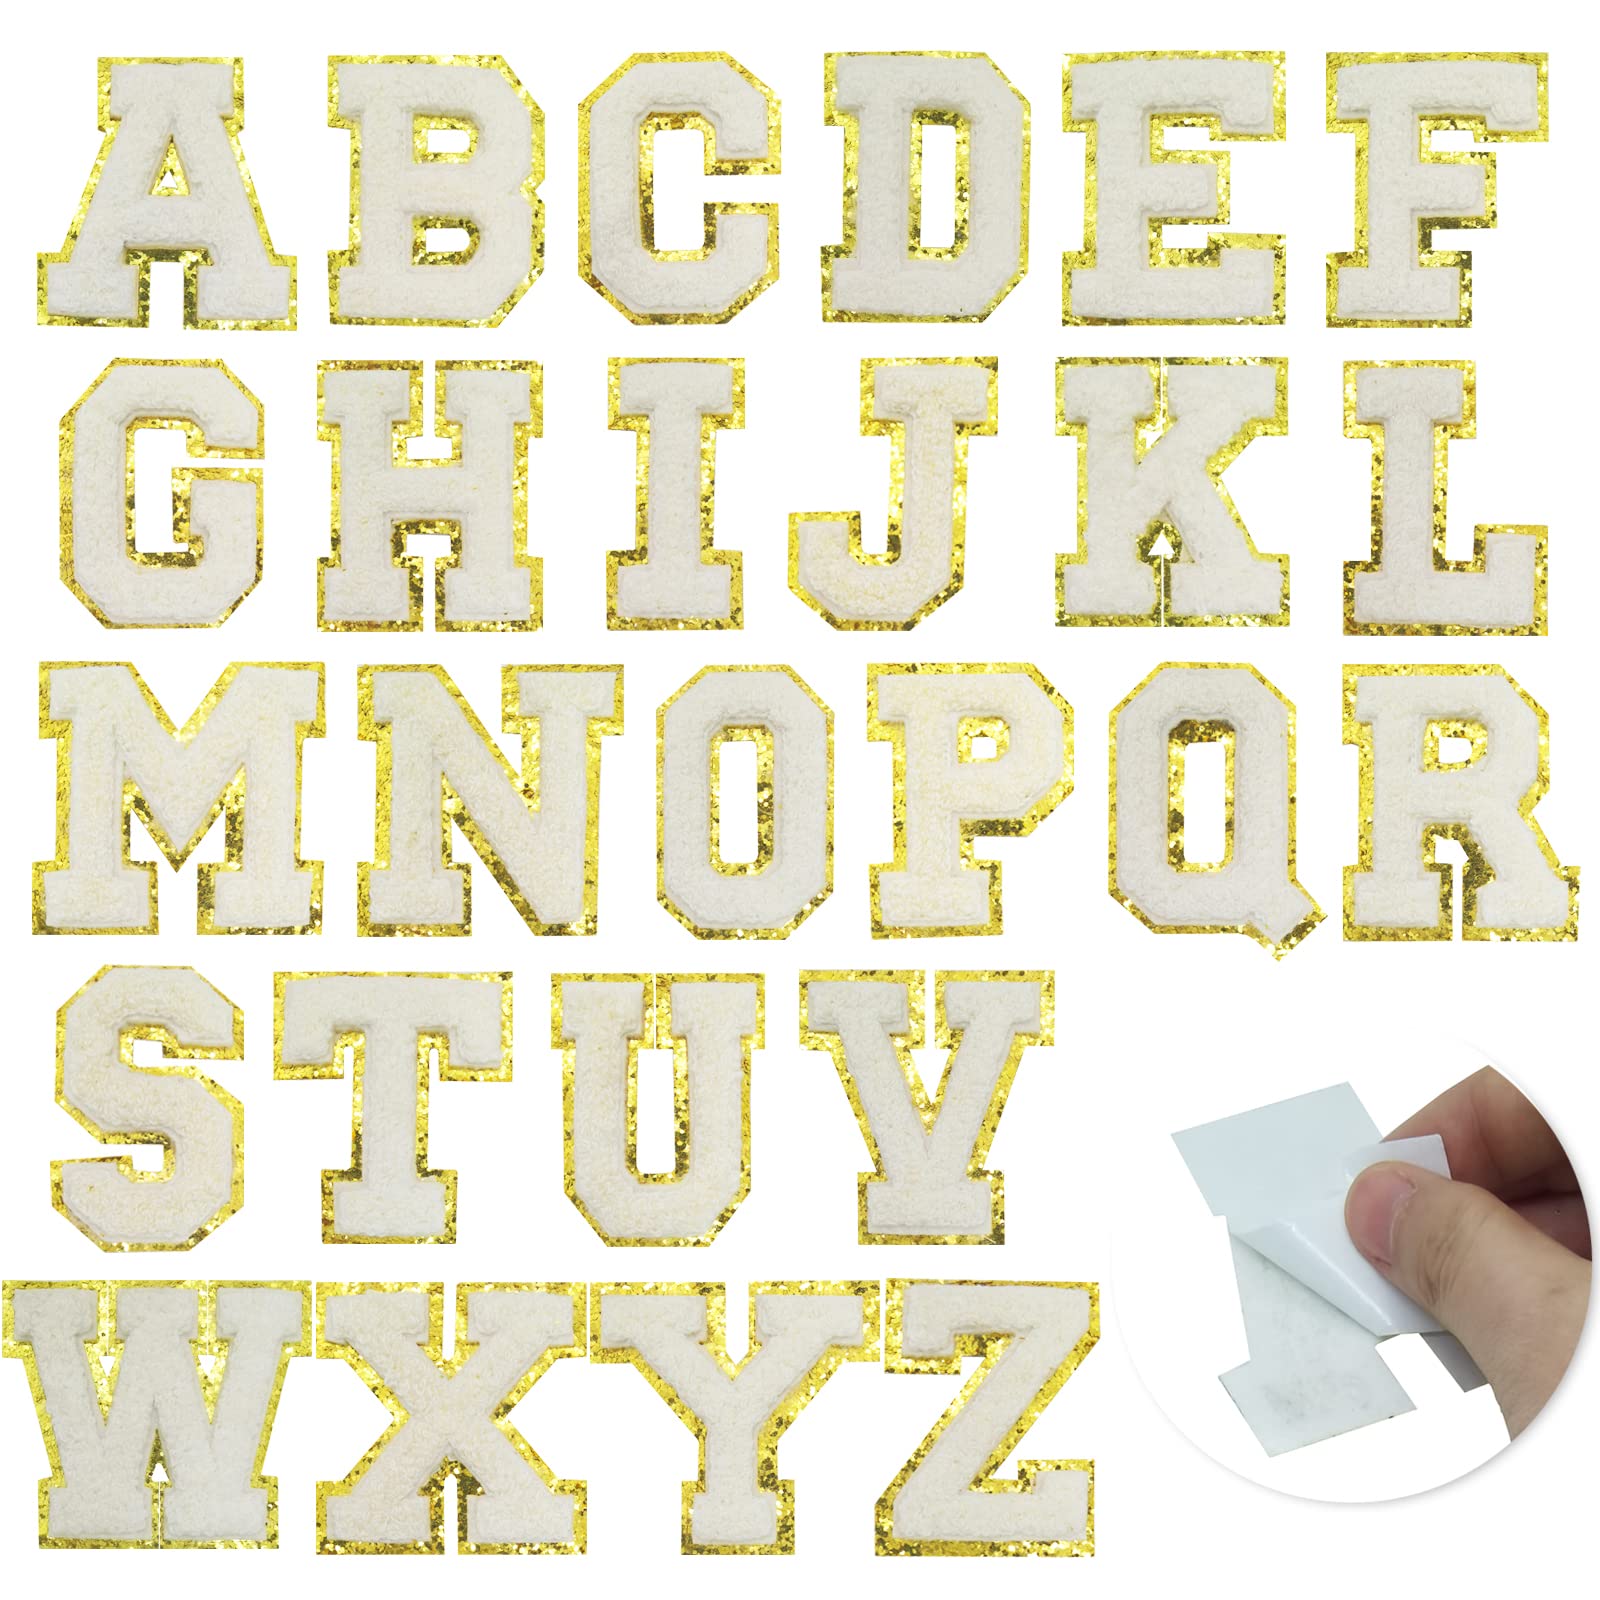  26 Pcs Rhinestone Iron On Letters Patches For DIY